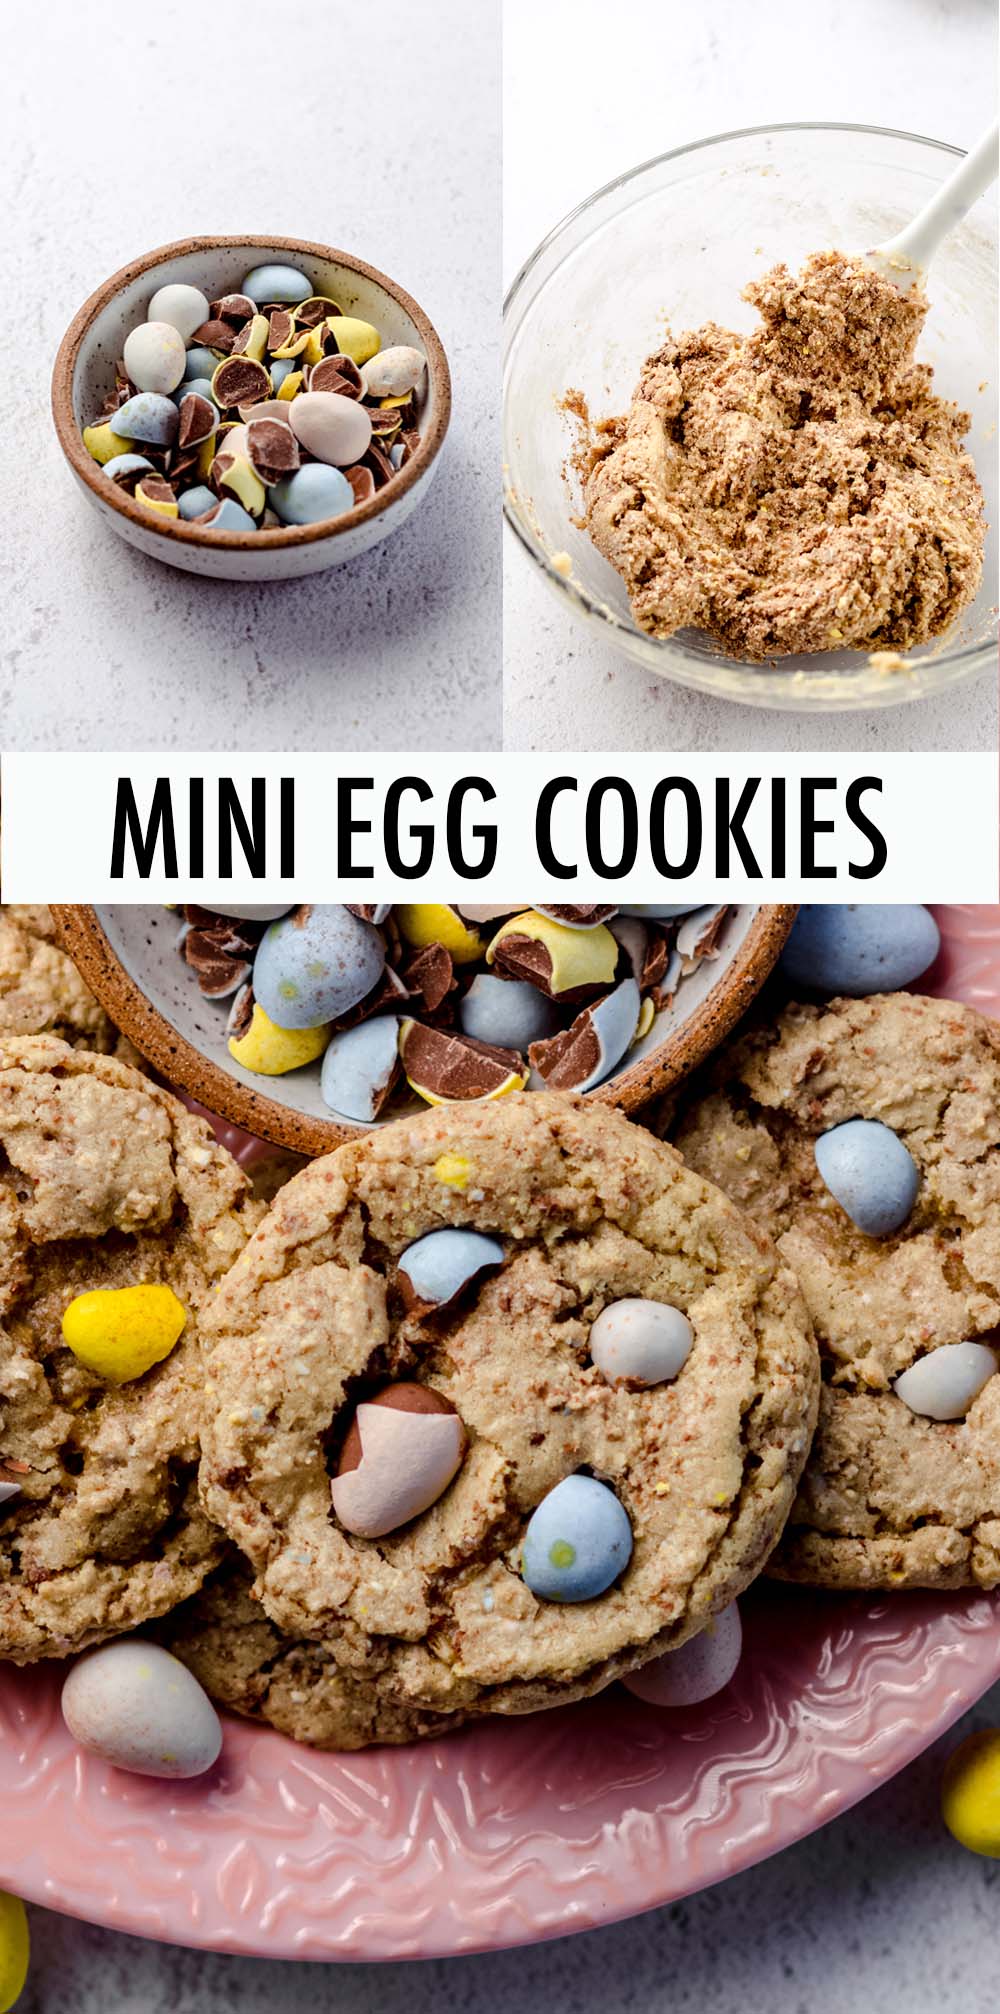 This Cadbury mini egg cookies recipe will level up your chocolate chip cookies for Easter. These cookies feature bits of that iconic mini egg shell in every bite alongside creamy chunks of smooth chocolate. via @frshaprilflours